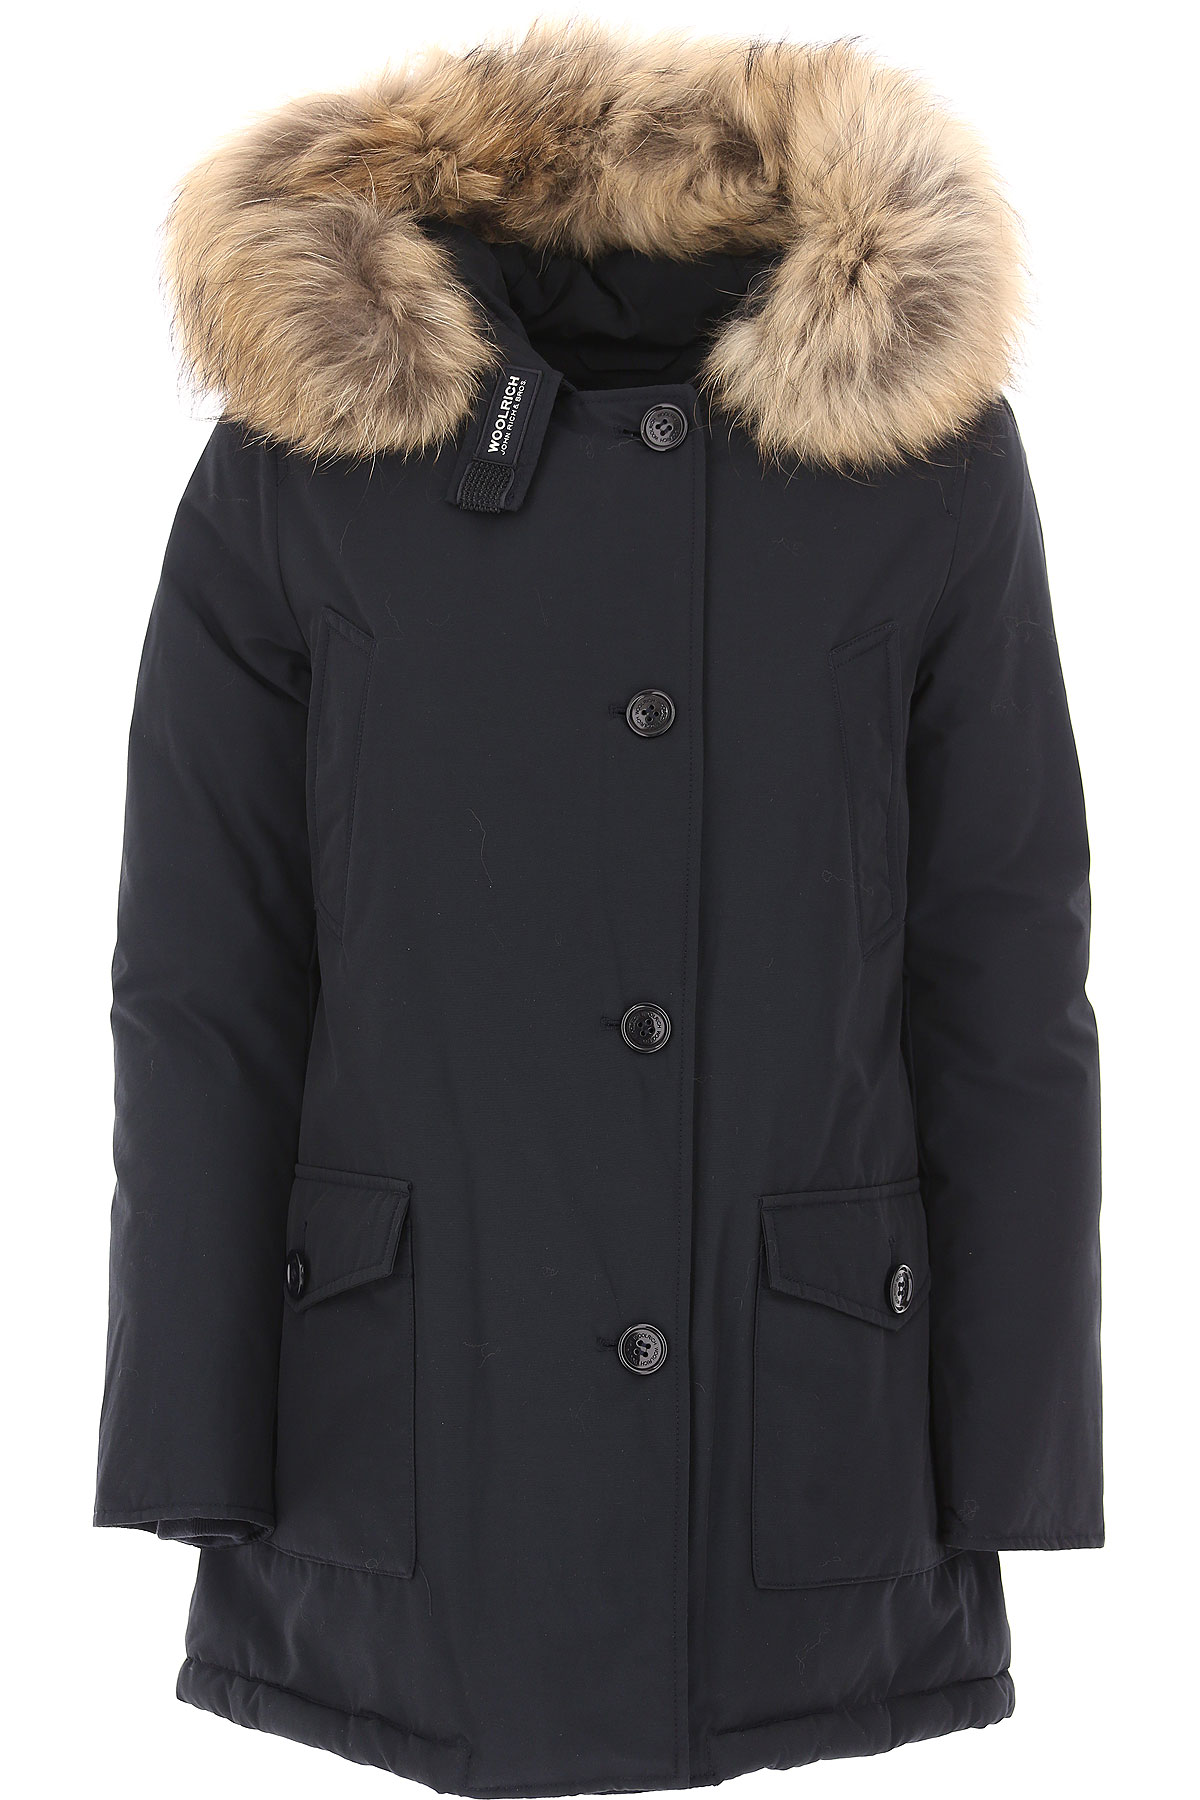 Womens Clothing Woolrich, Style code: wwcps2479-cn03-dkn